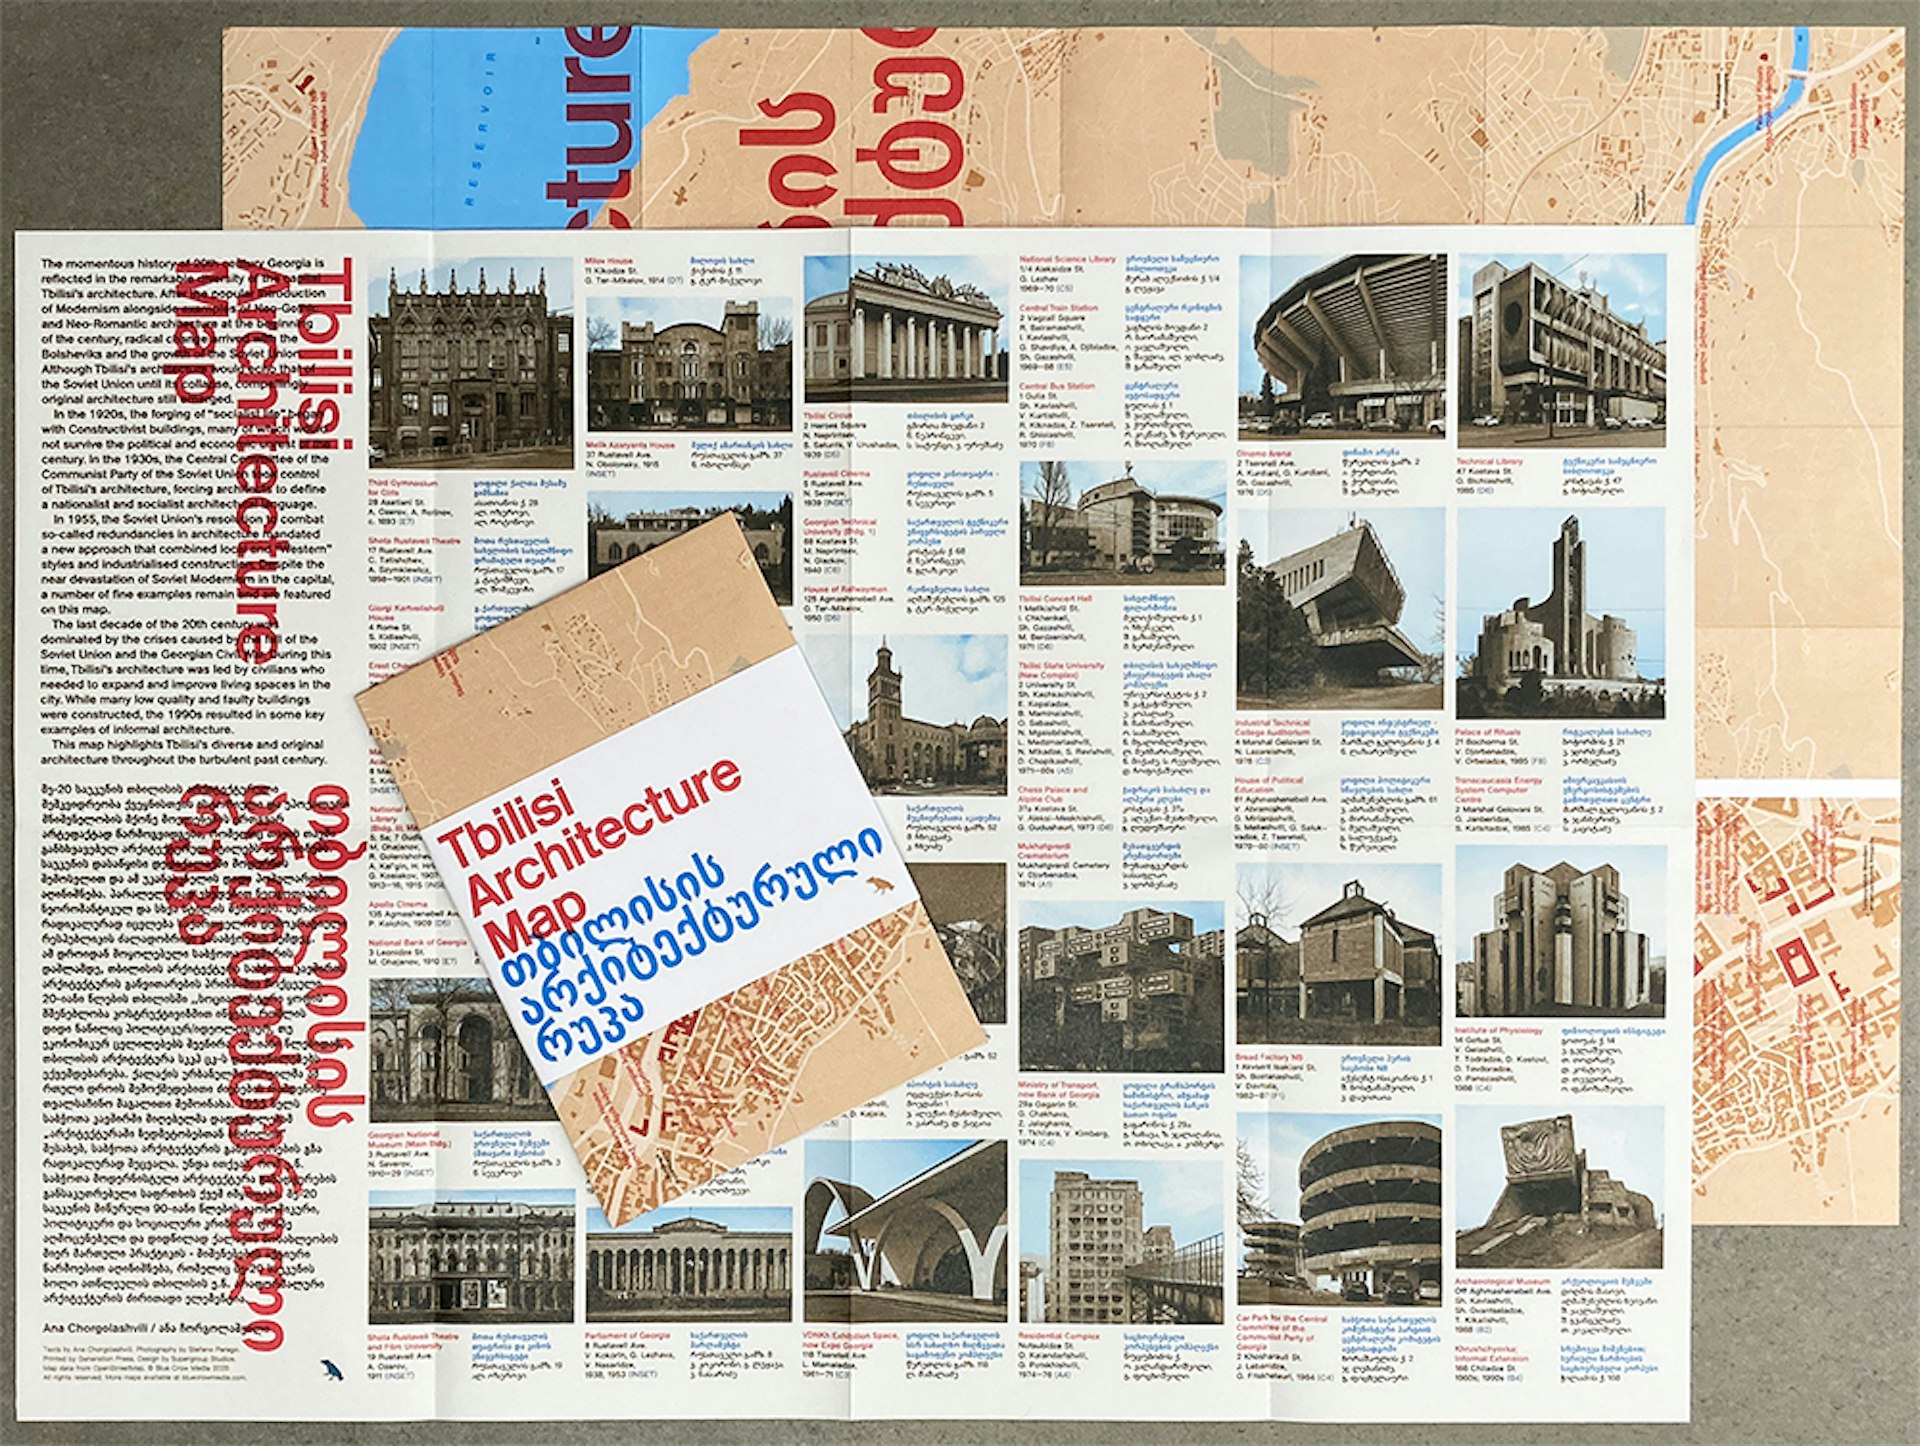 A photograph of the Tbilisi Architecture Map, with text and photographs of buildings